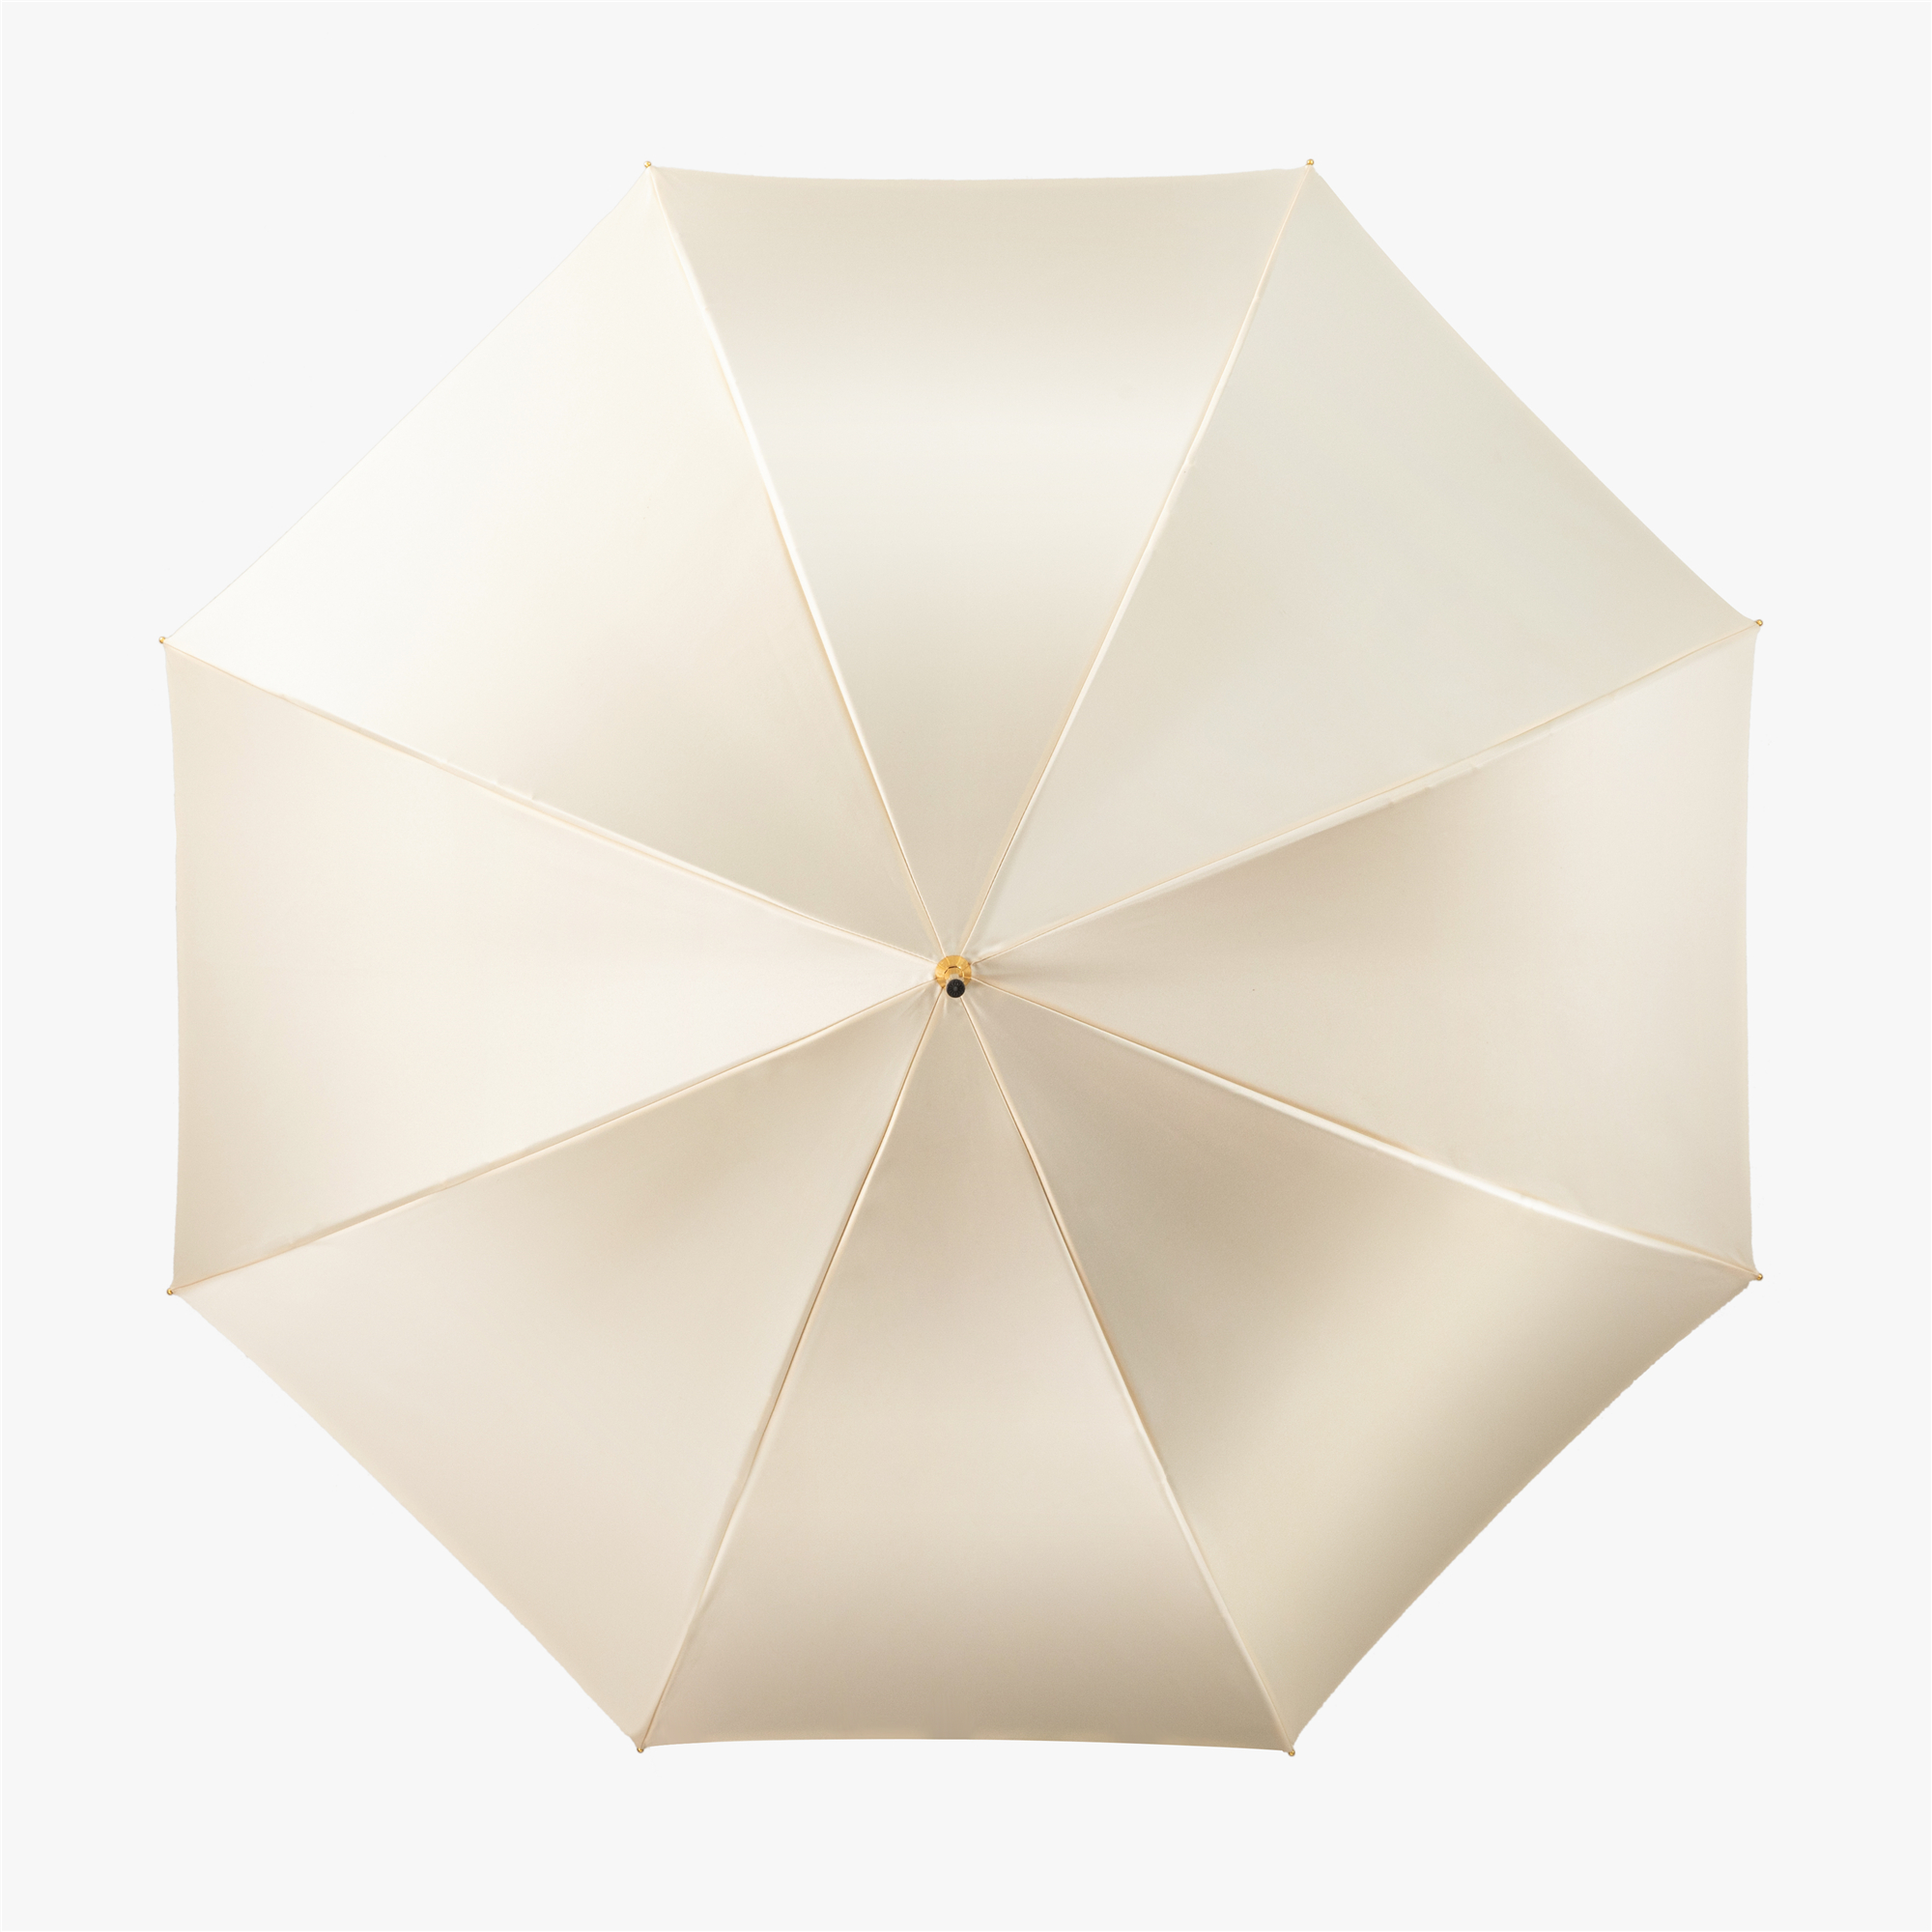 Swan curved double umbrella